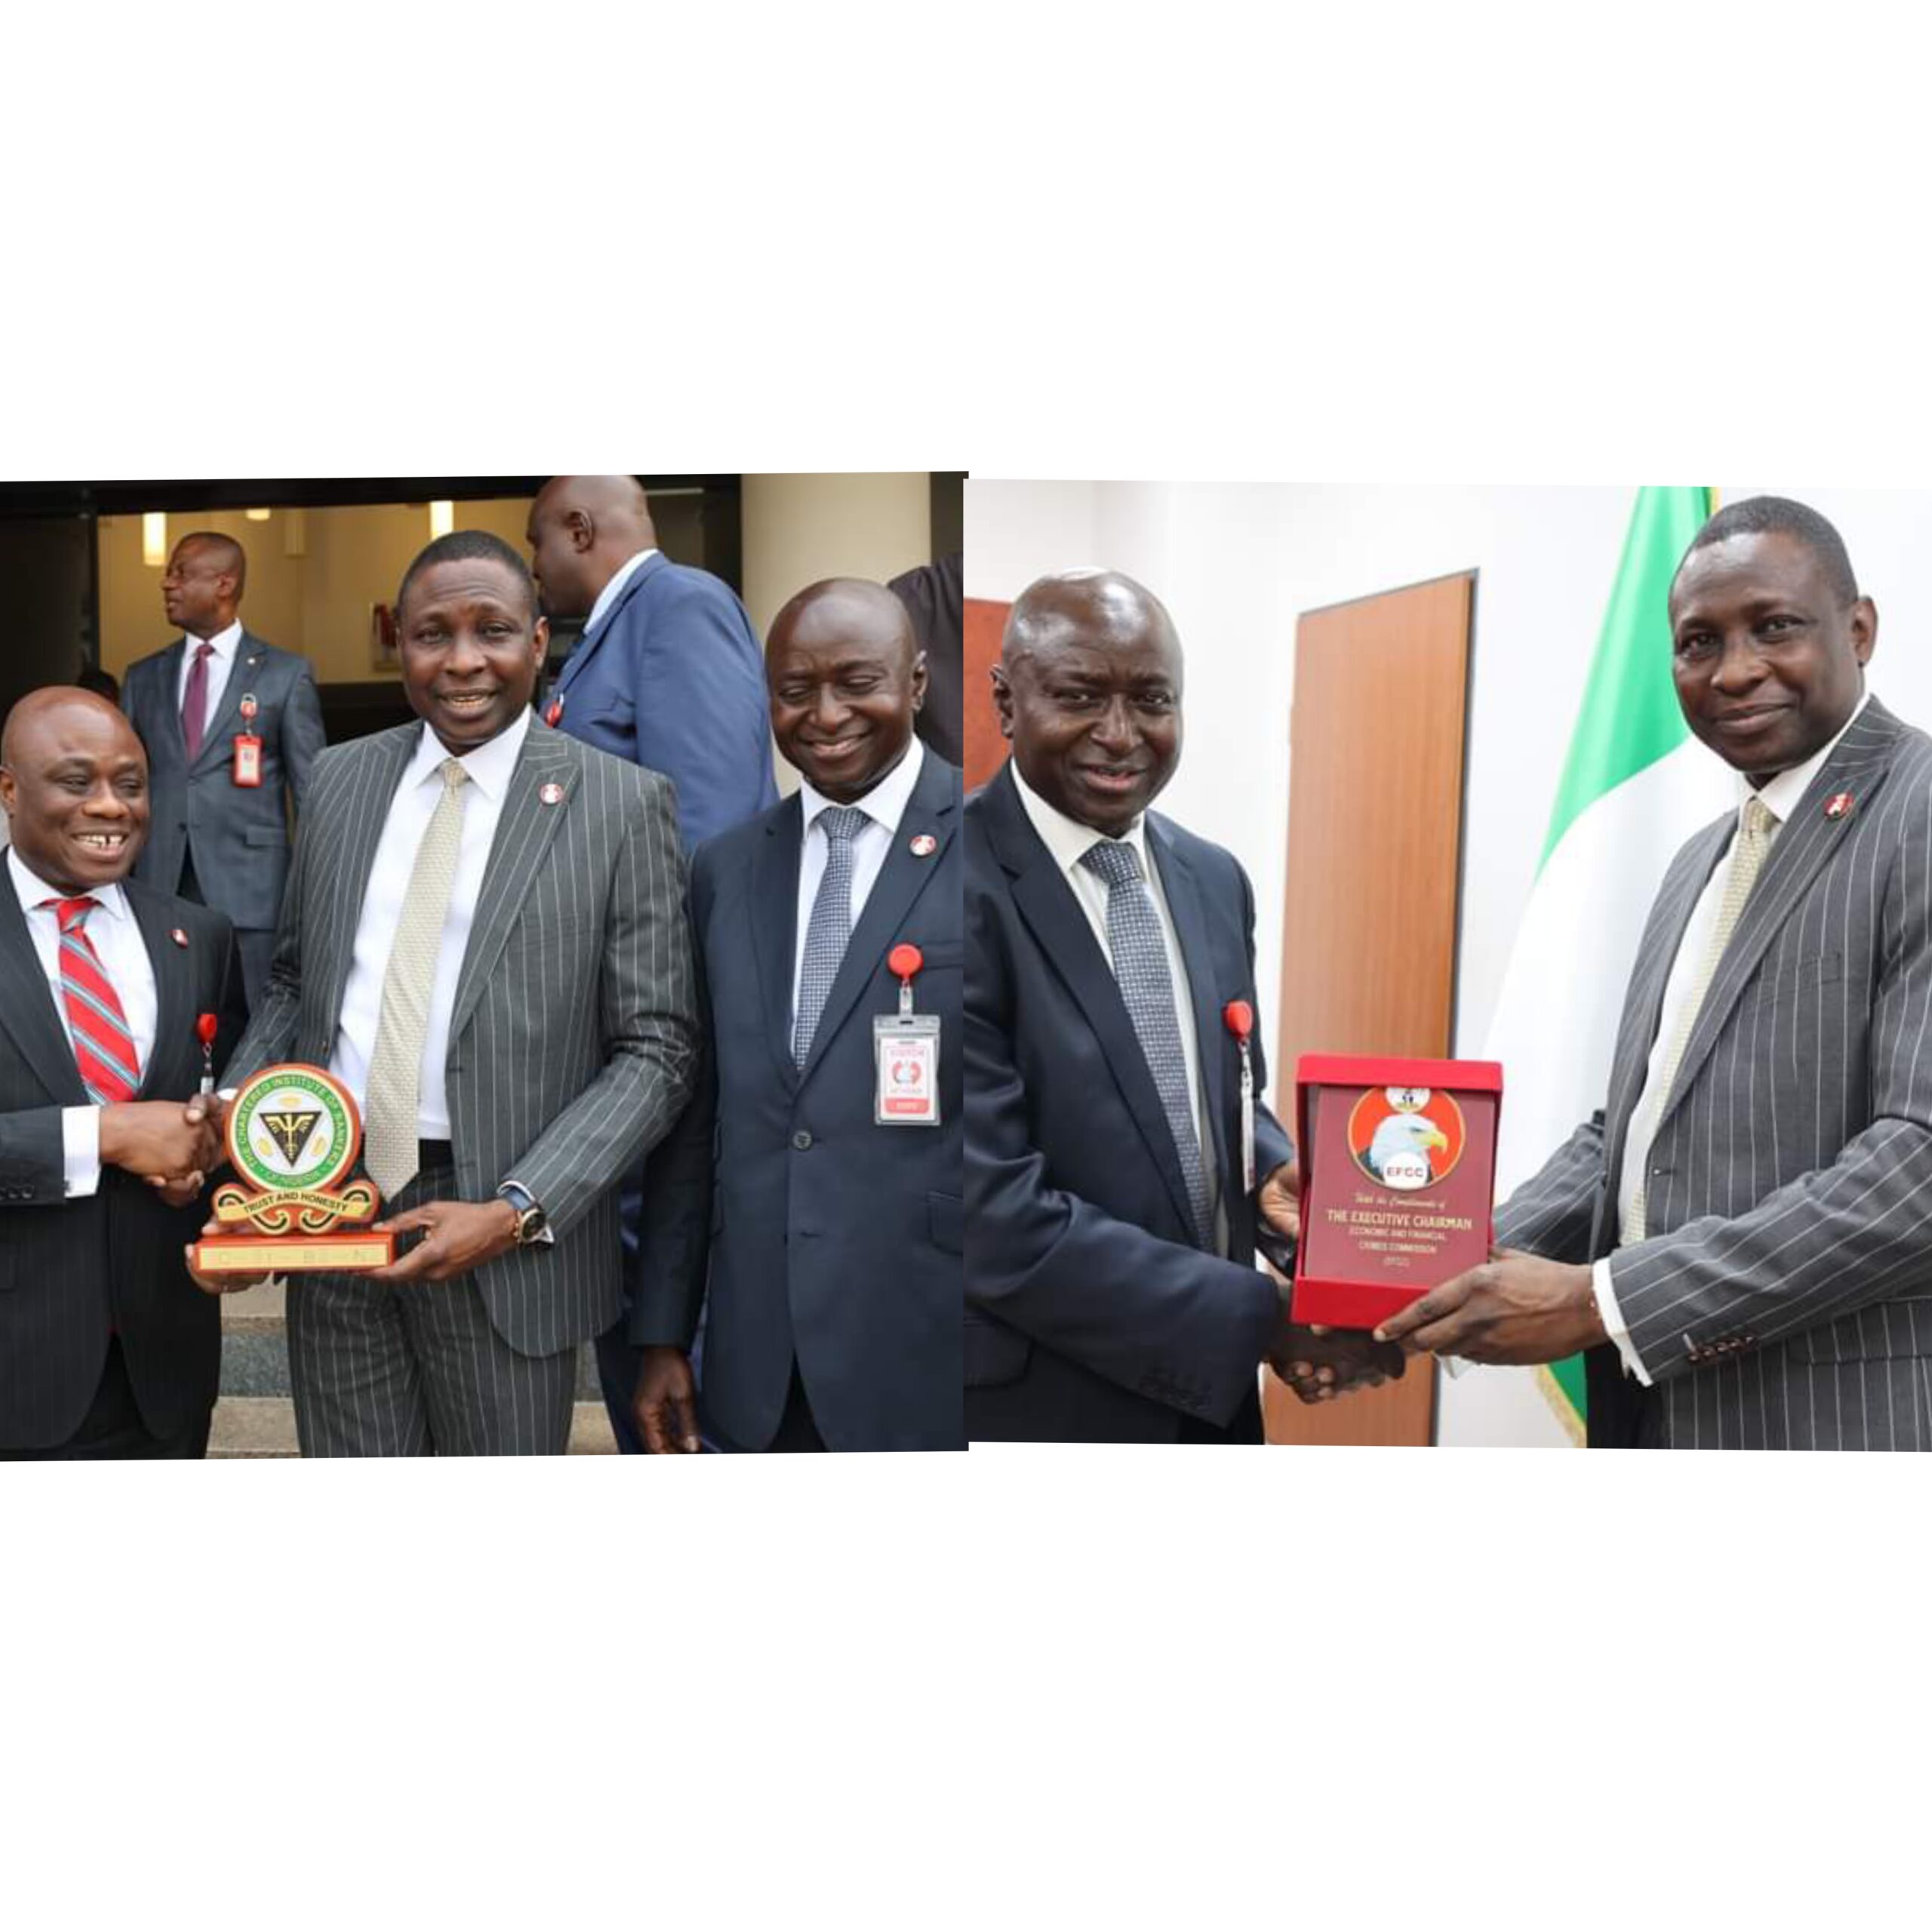 EFCC Chair, Olukoyede, Charges Banks’ CEOs to Play by the Rules in Fight Against Corruption